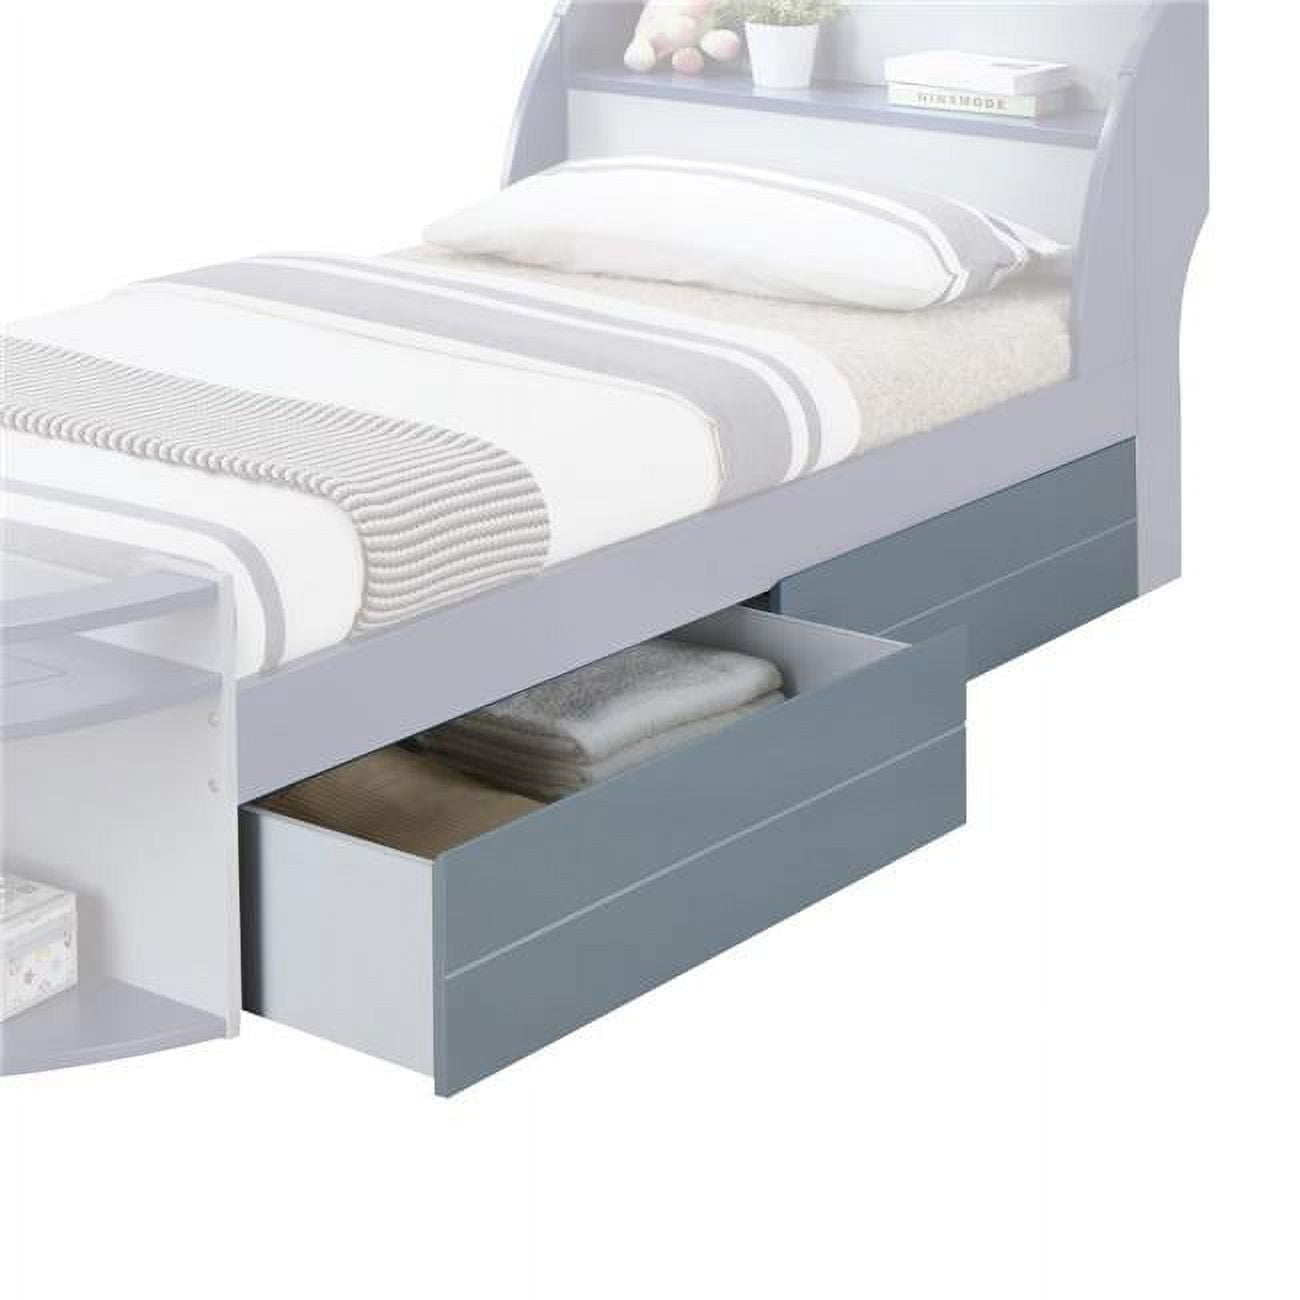 Picture of Acme Furniture 30624 37 x 24 x 9 in. Neptune II Drawers - Optional, Gray - 2 Piece